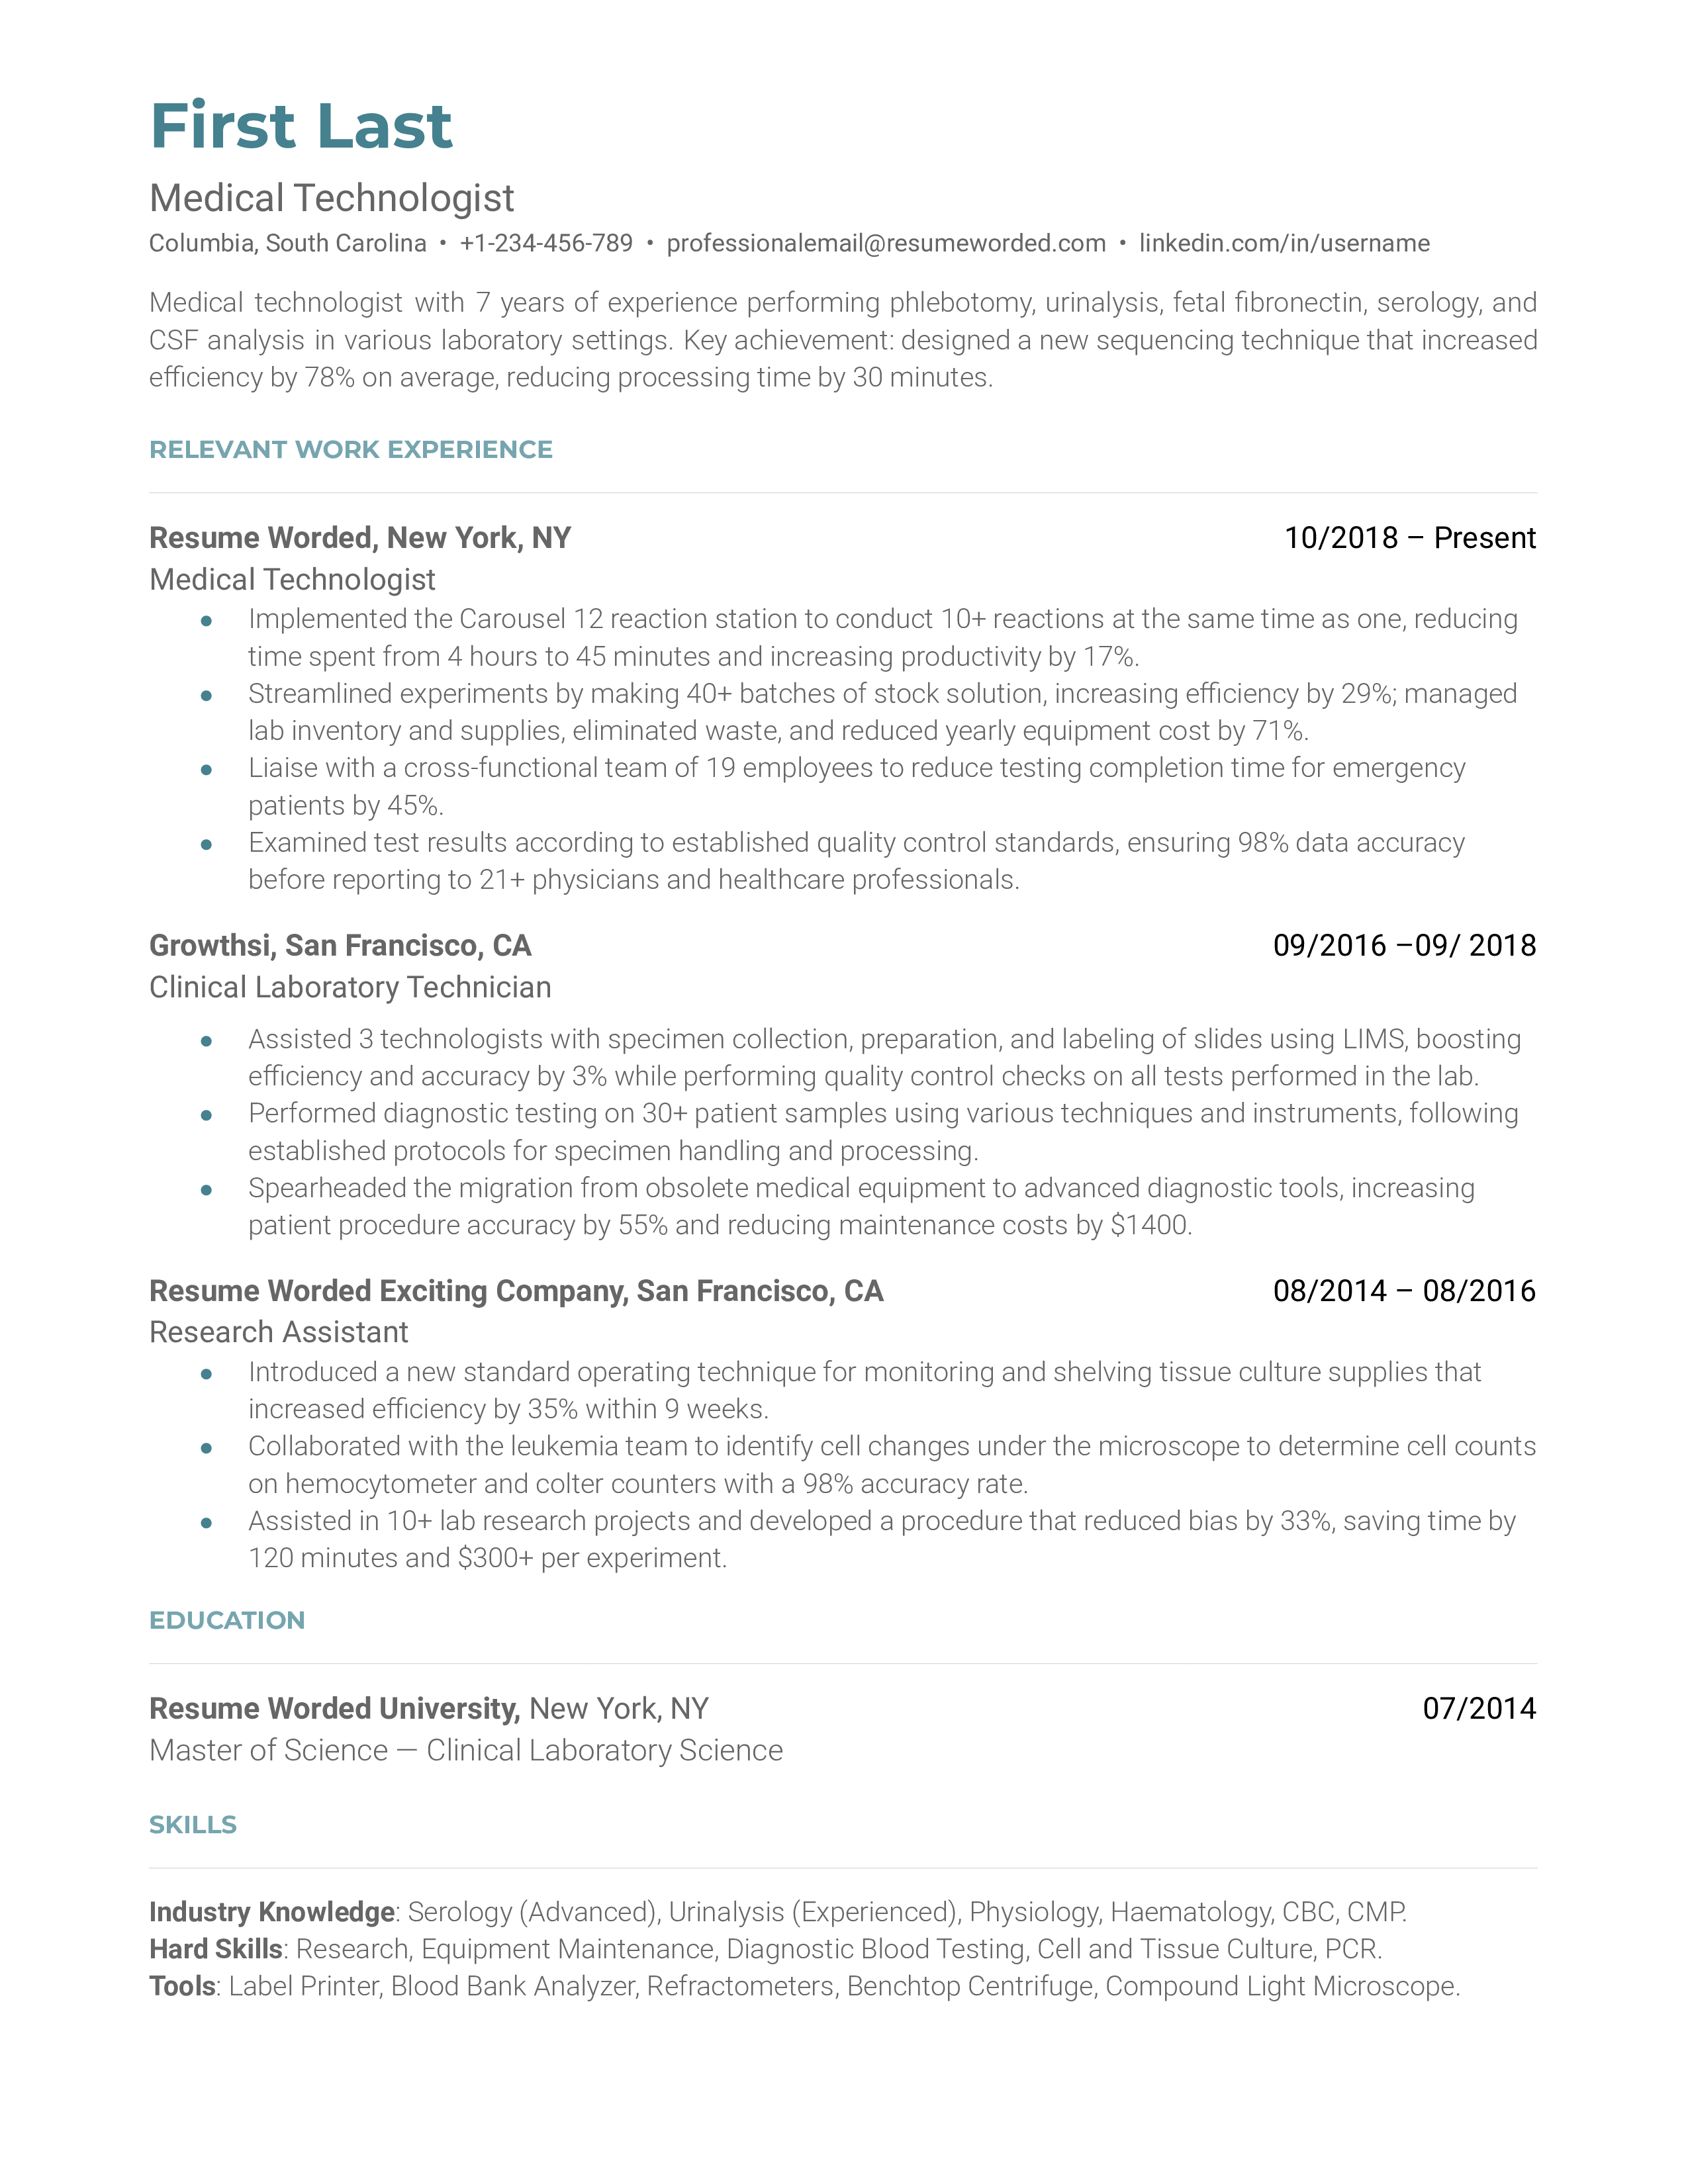 A medical technologist resume sample that highlights the applicant's qualifications and experience.